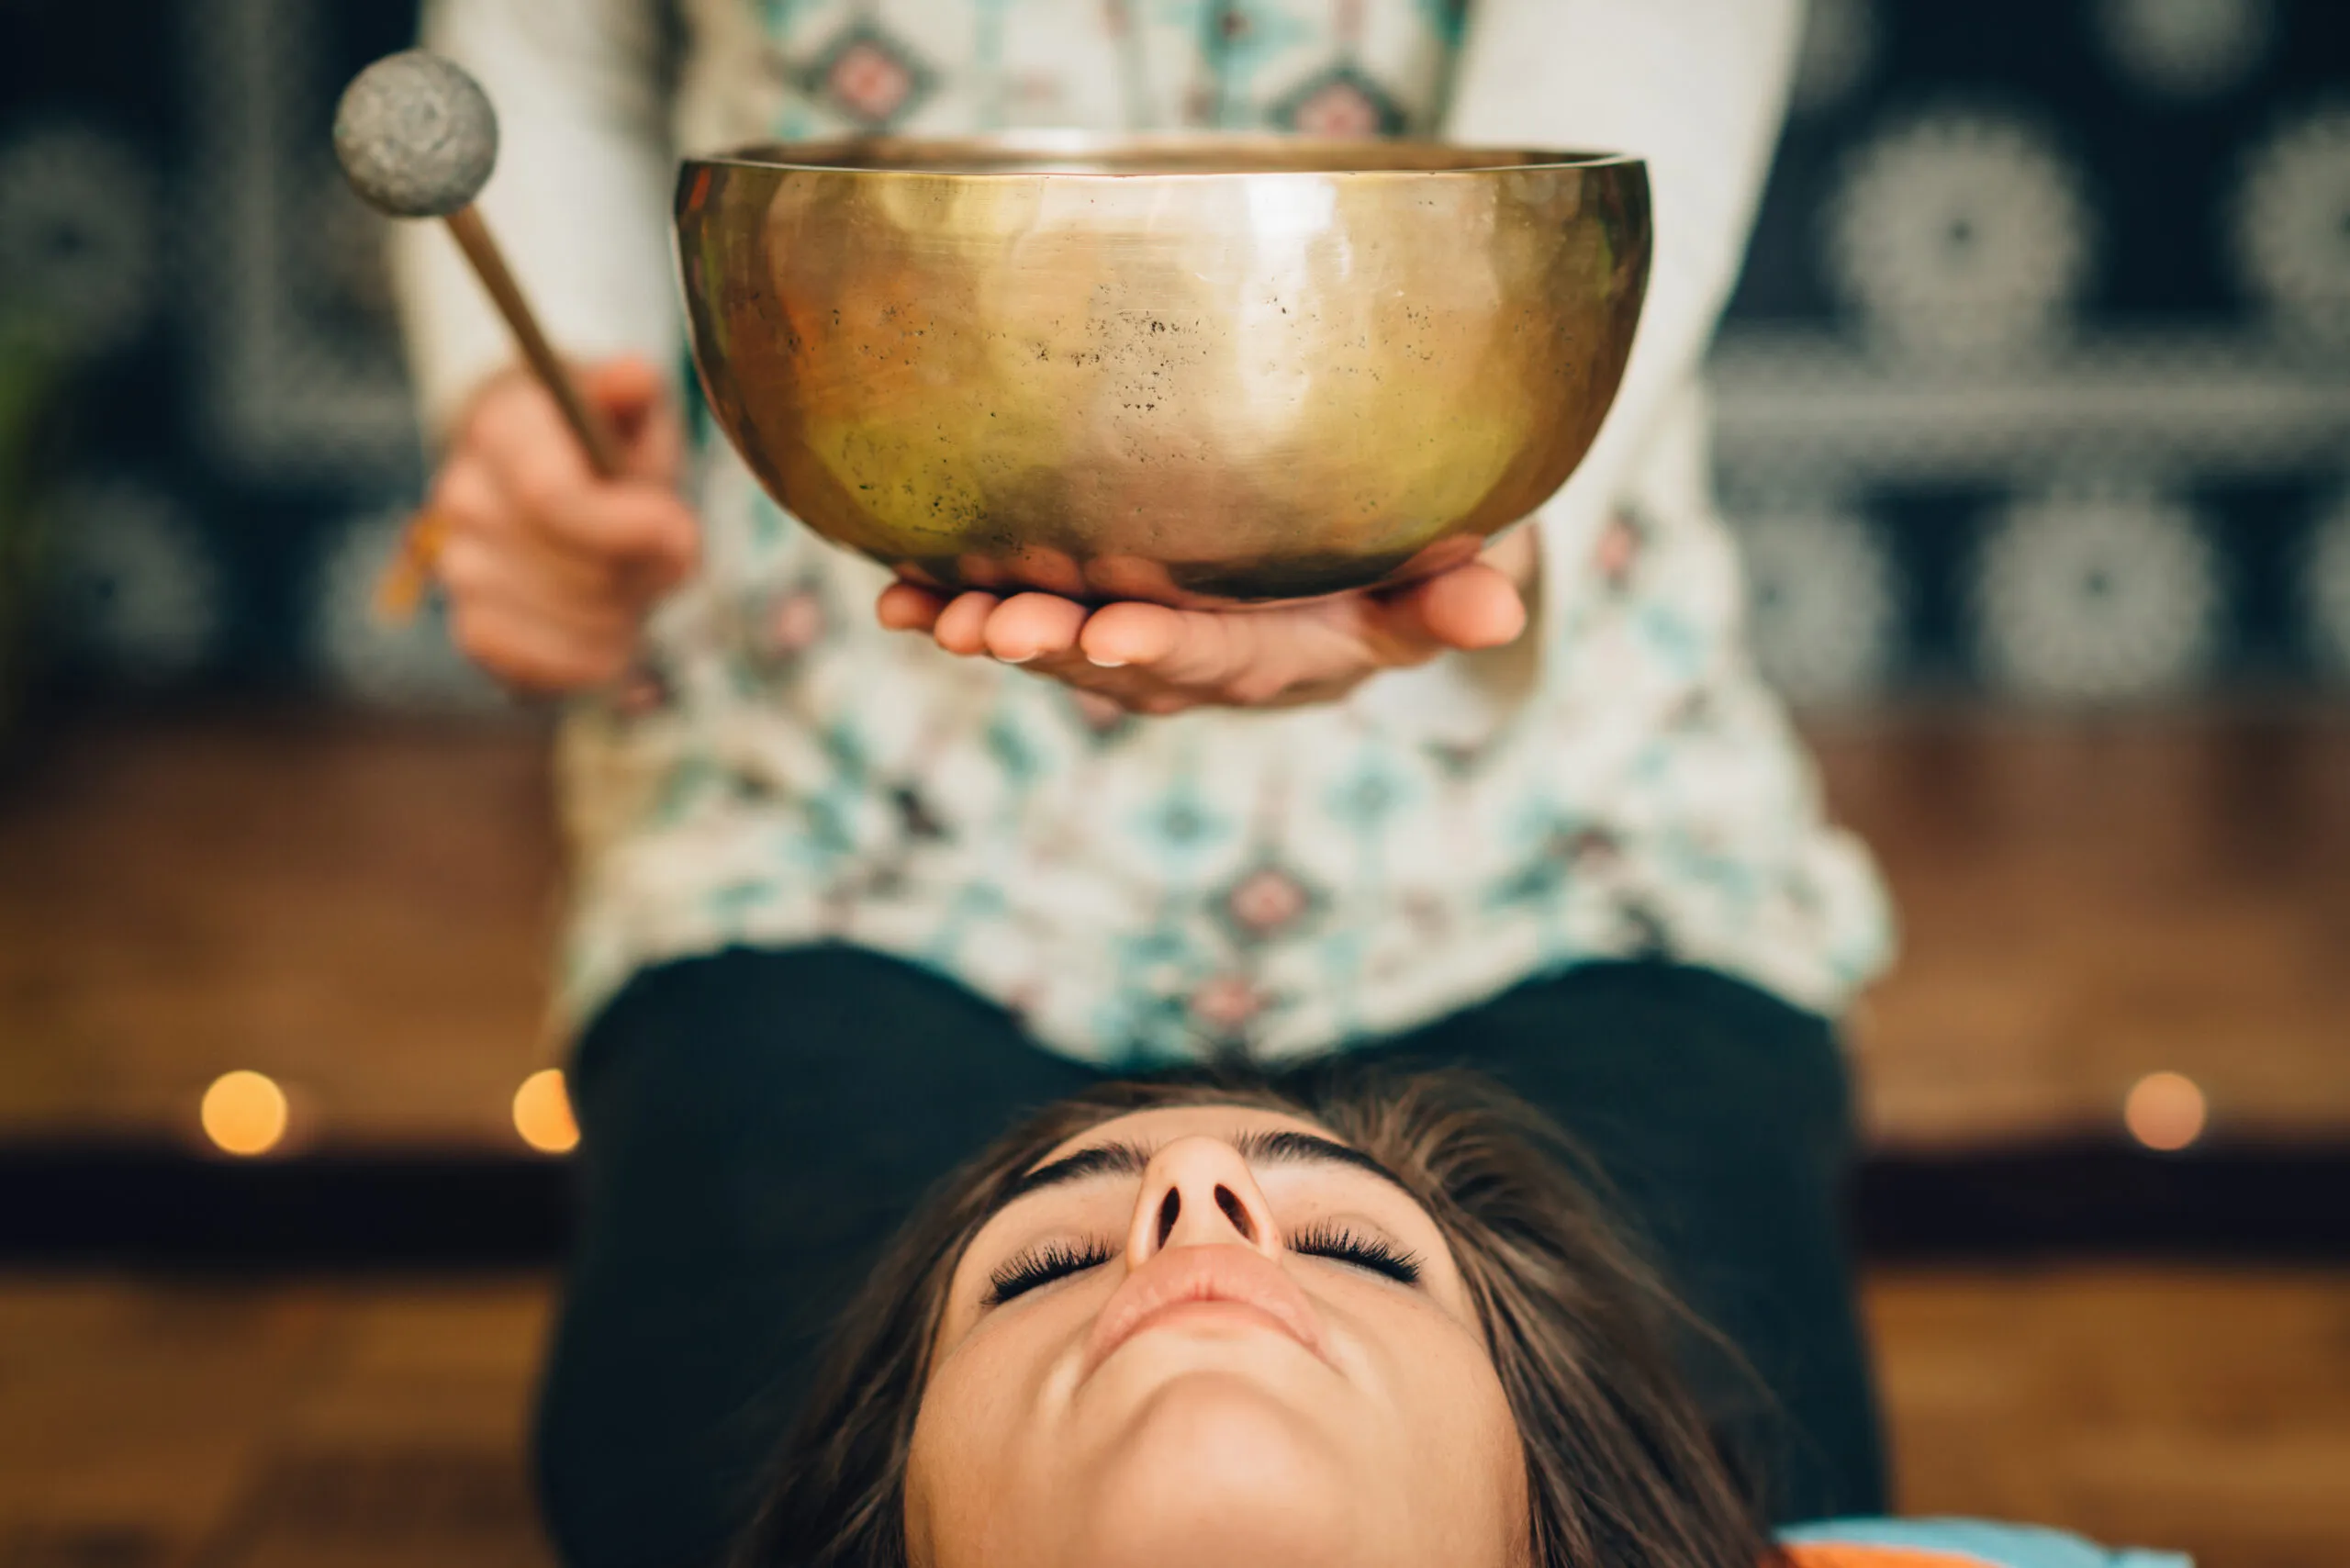 A Beginner’s Guide to Sound Baths – What They Are, How To Choose a Good One and What the Research Shows